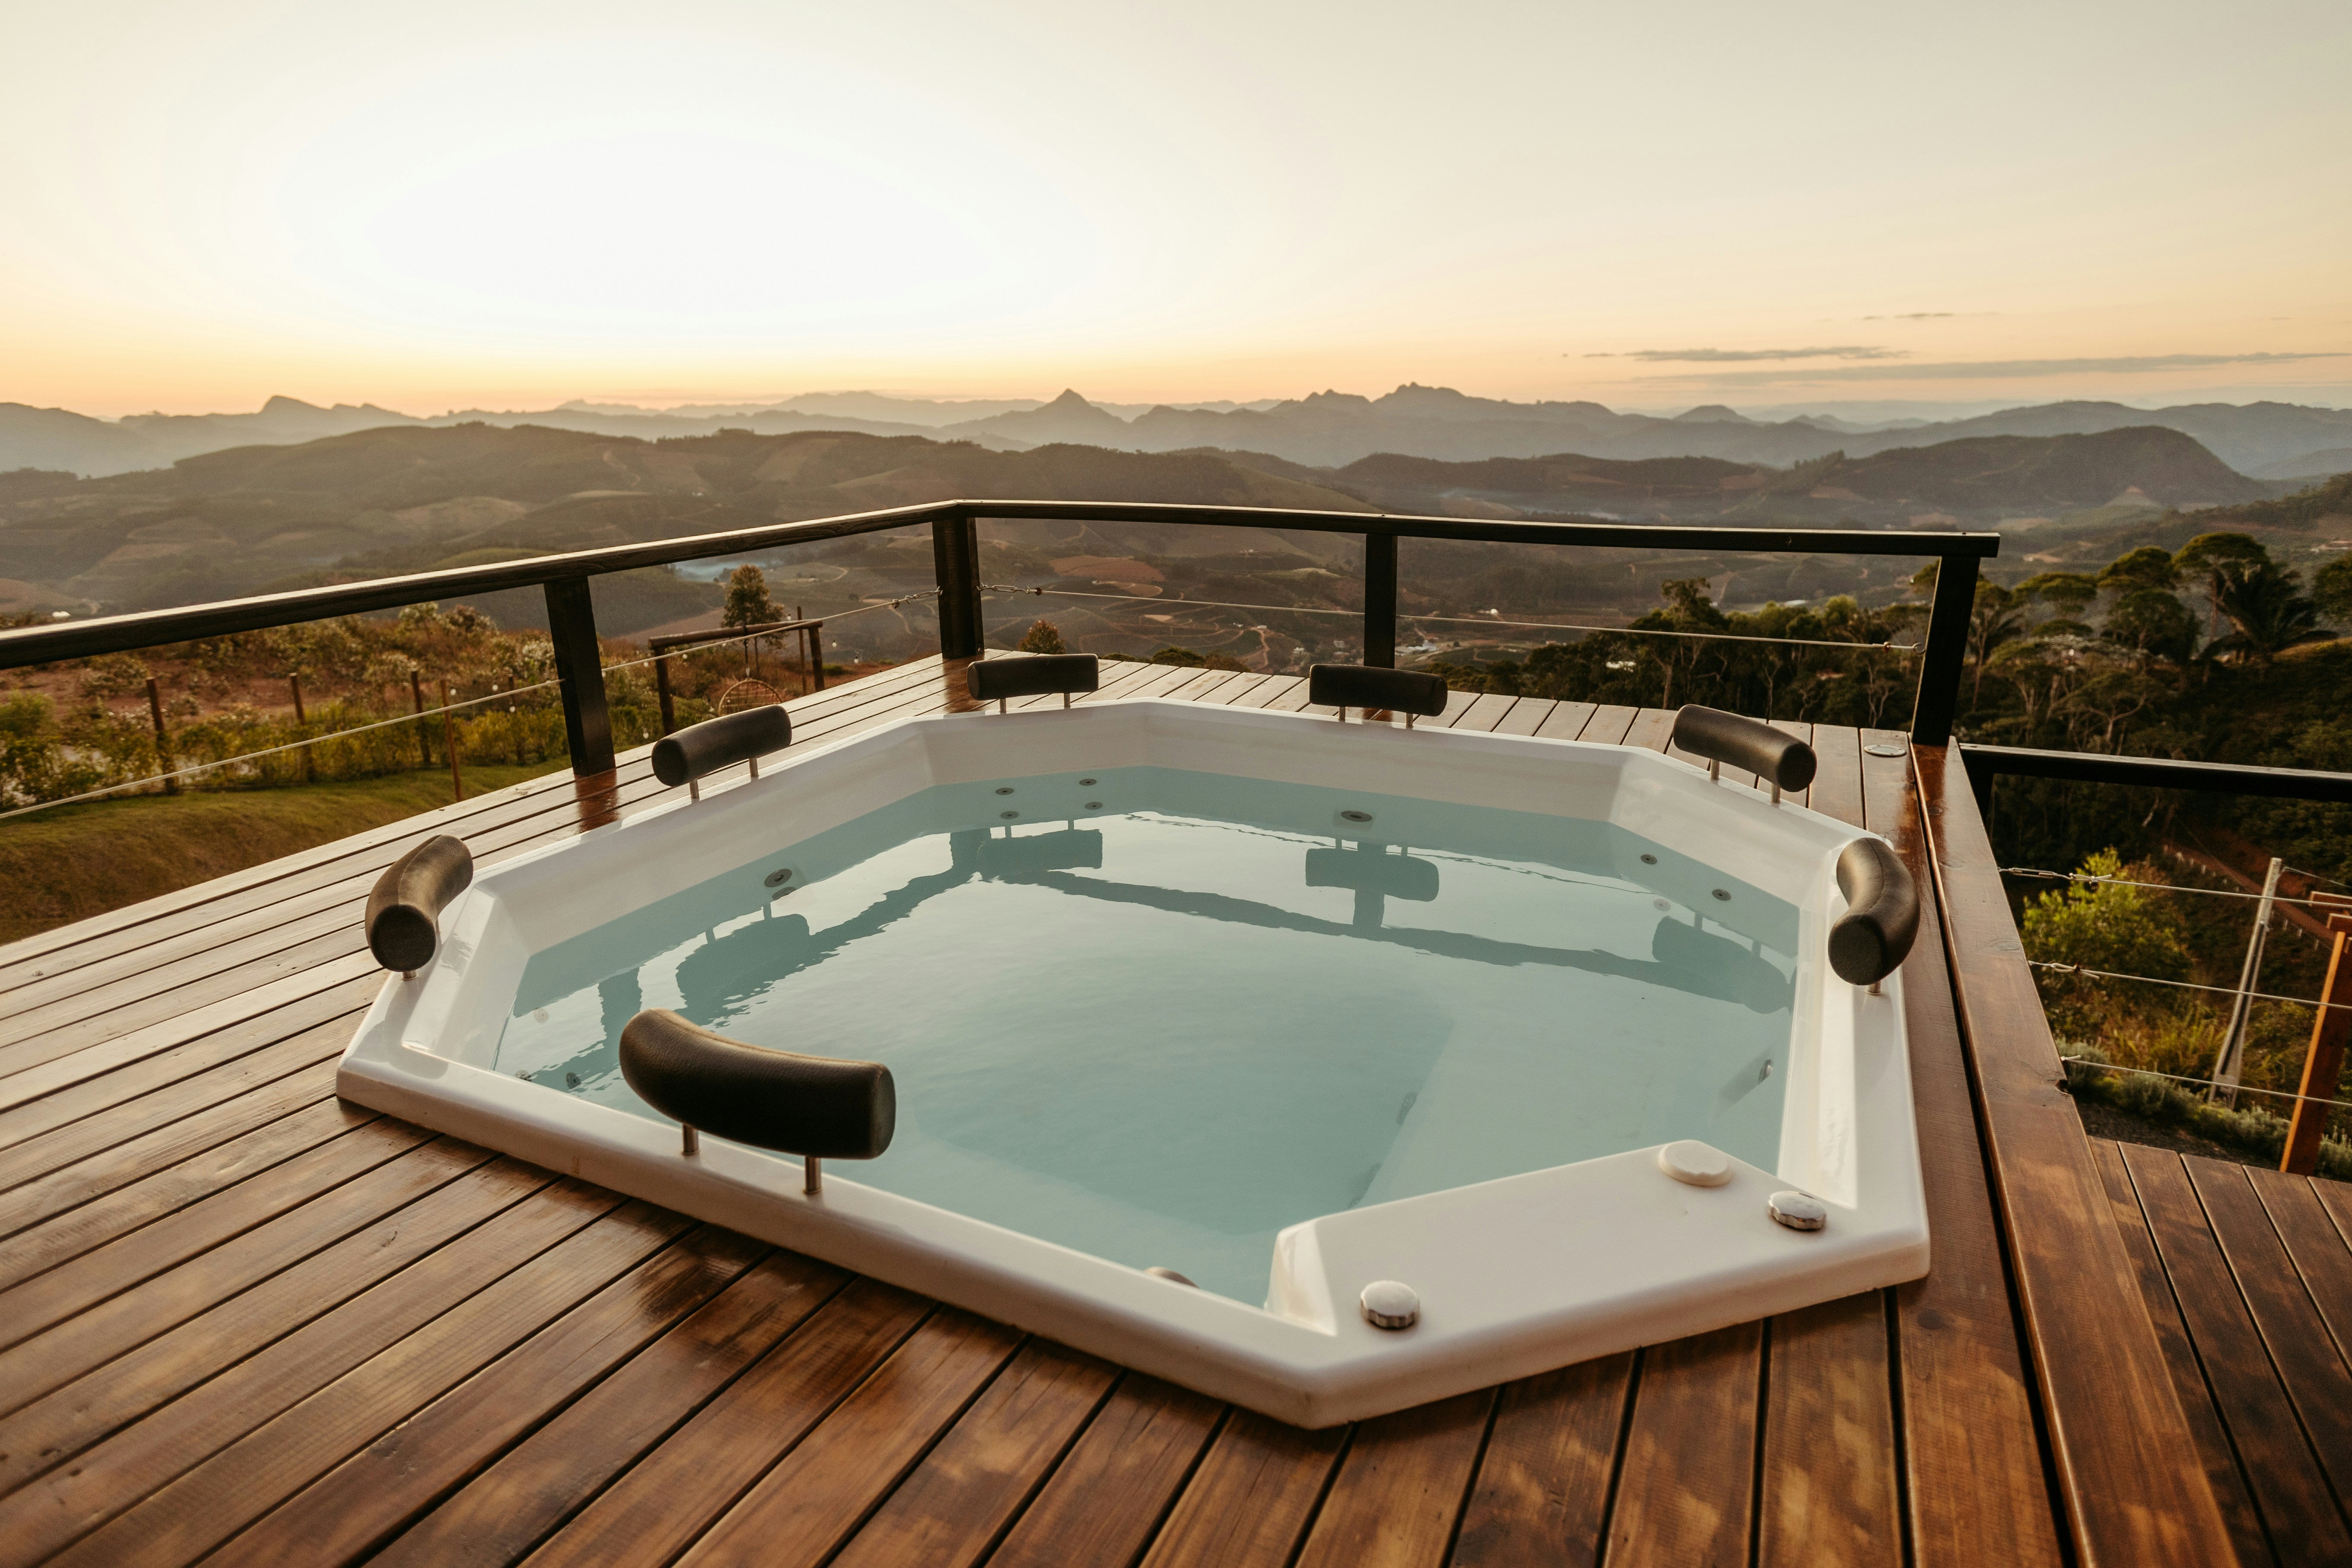 Enhancing Your Hot Tub Experience with Proper Filtration Practices